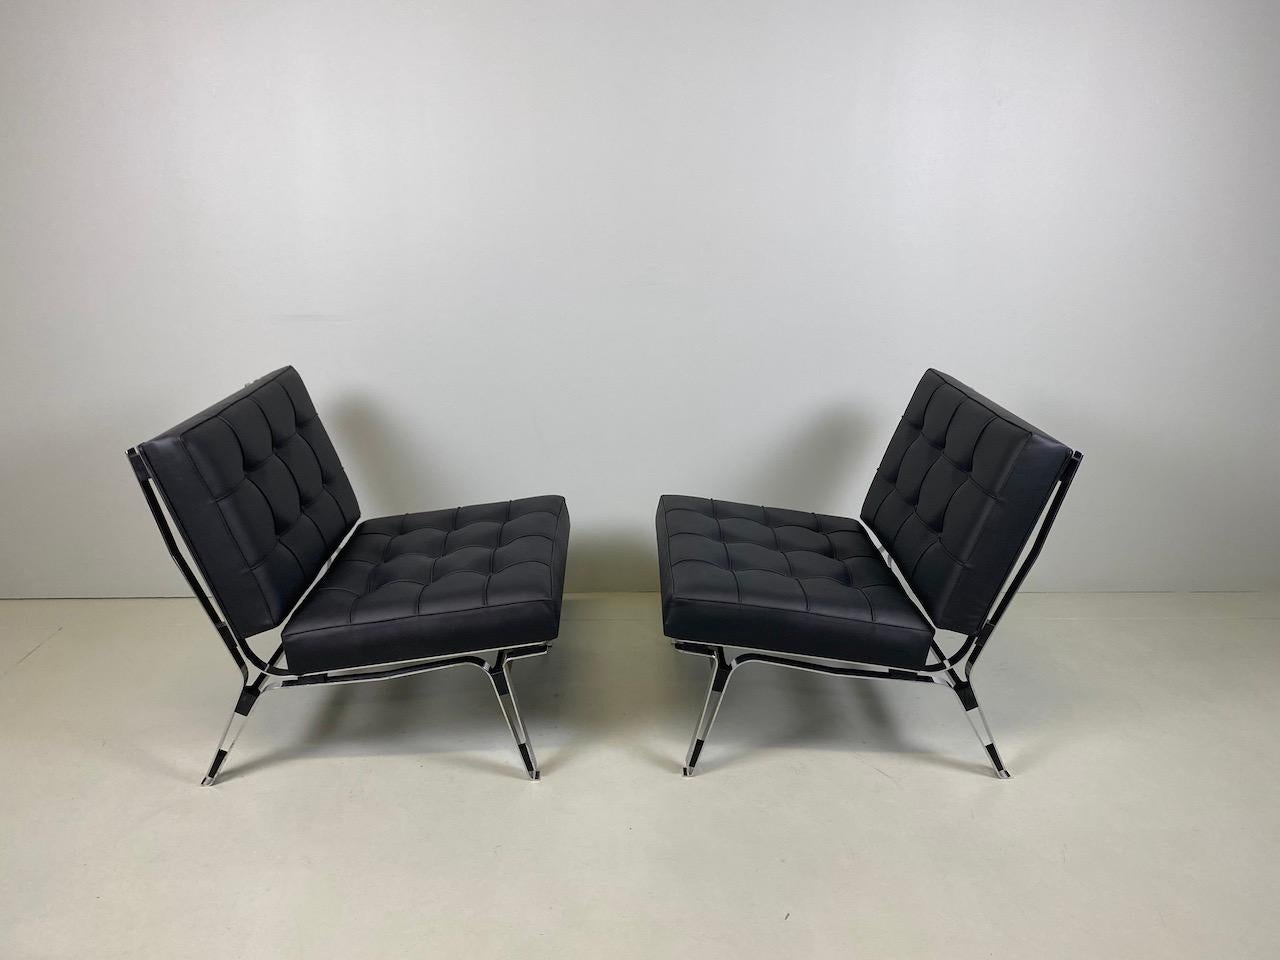 Steel Rare Ico Parisi '856' Leather Lounge Chairs, Cassina, 1957